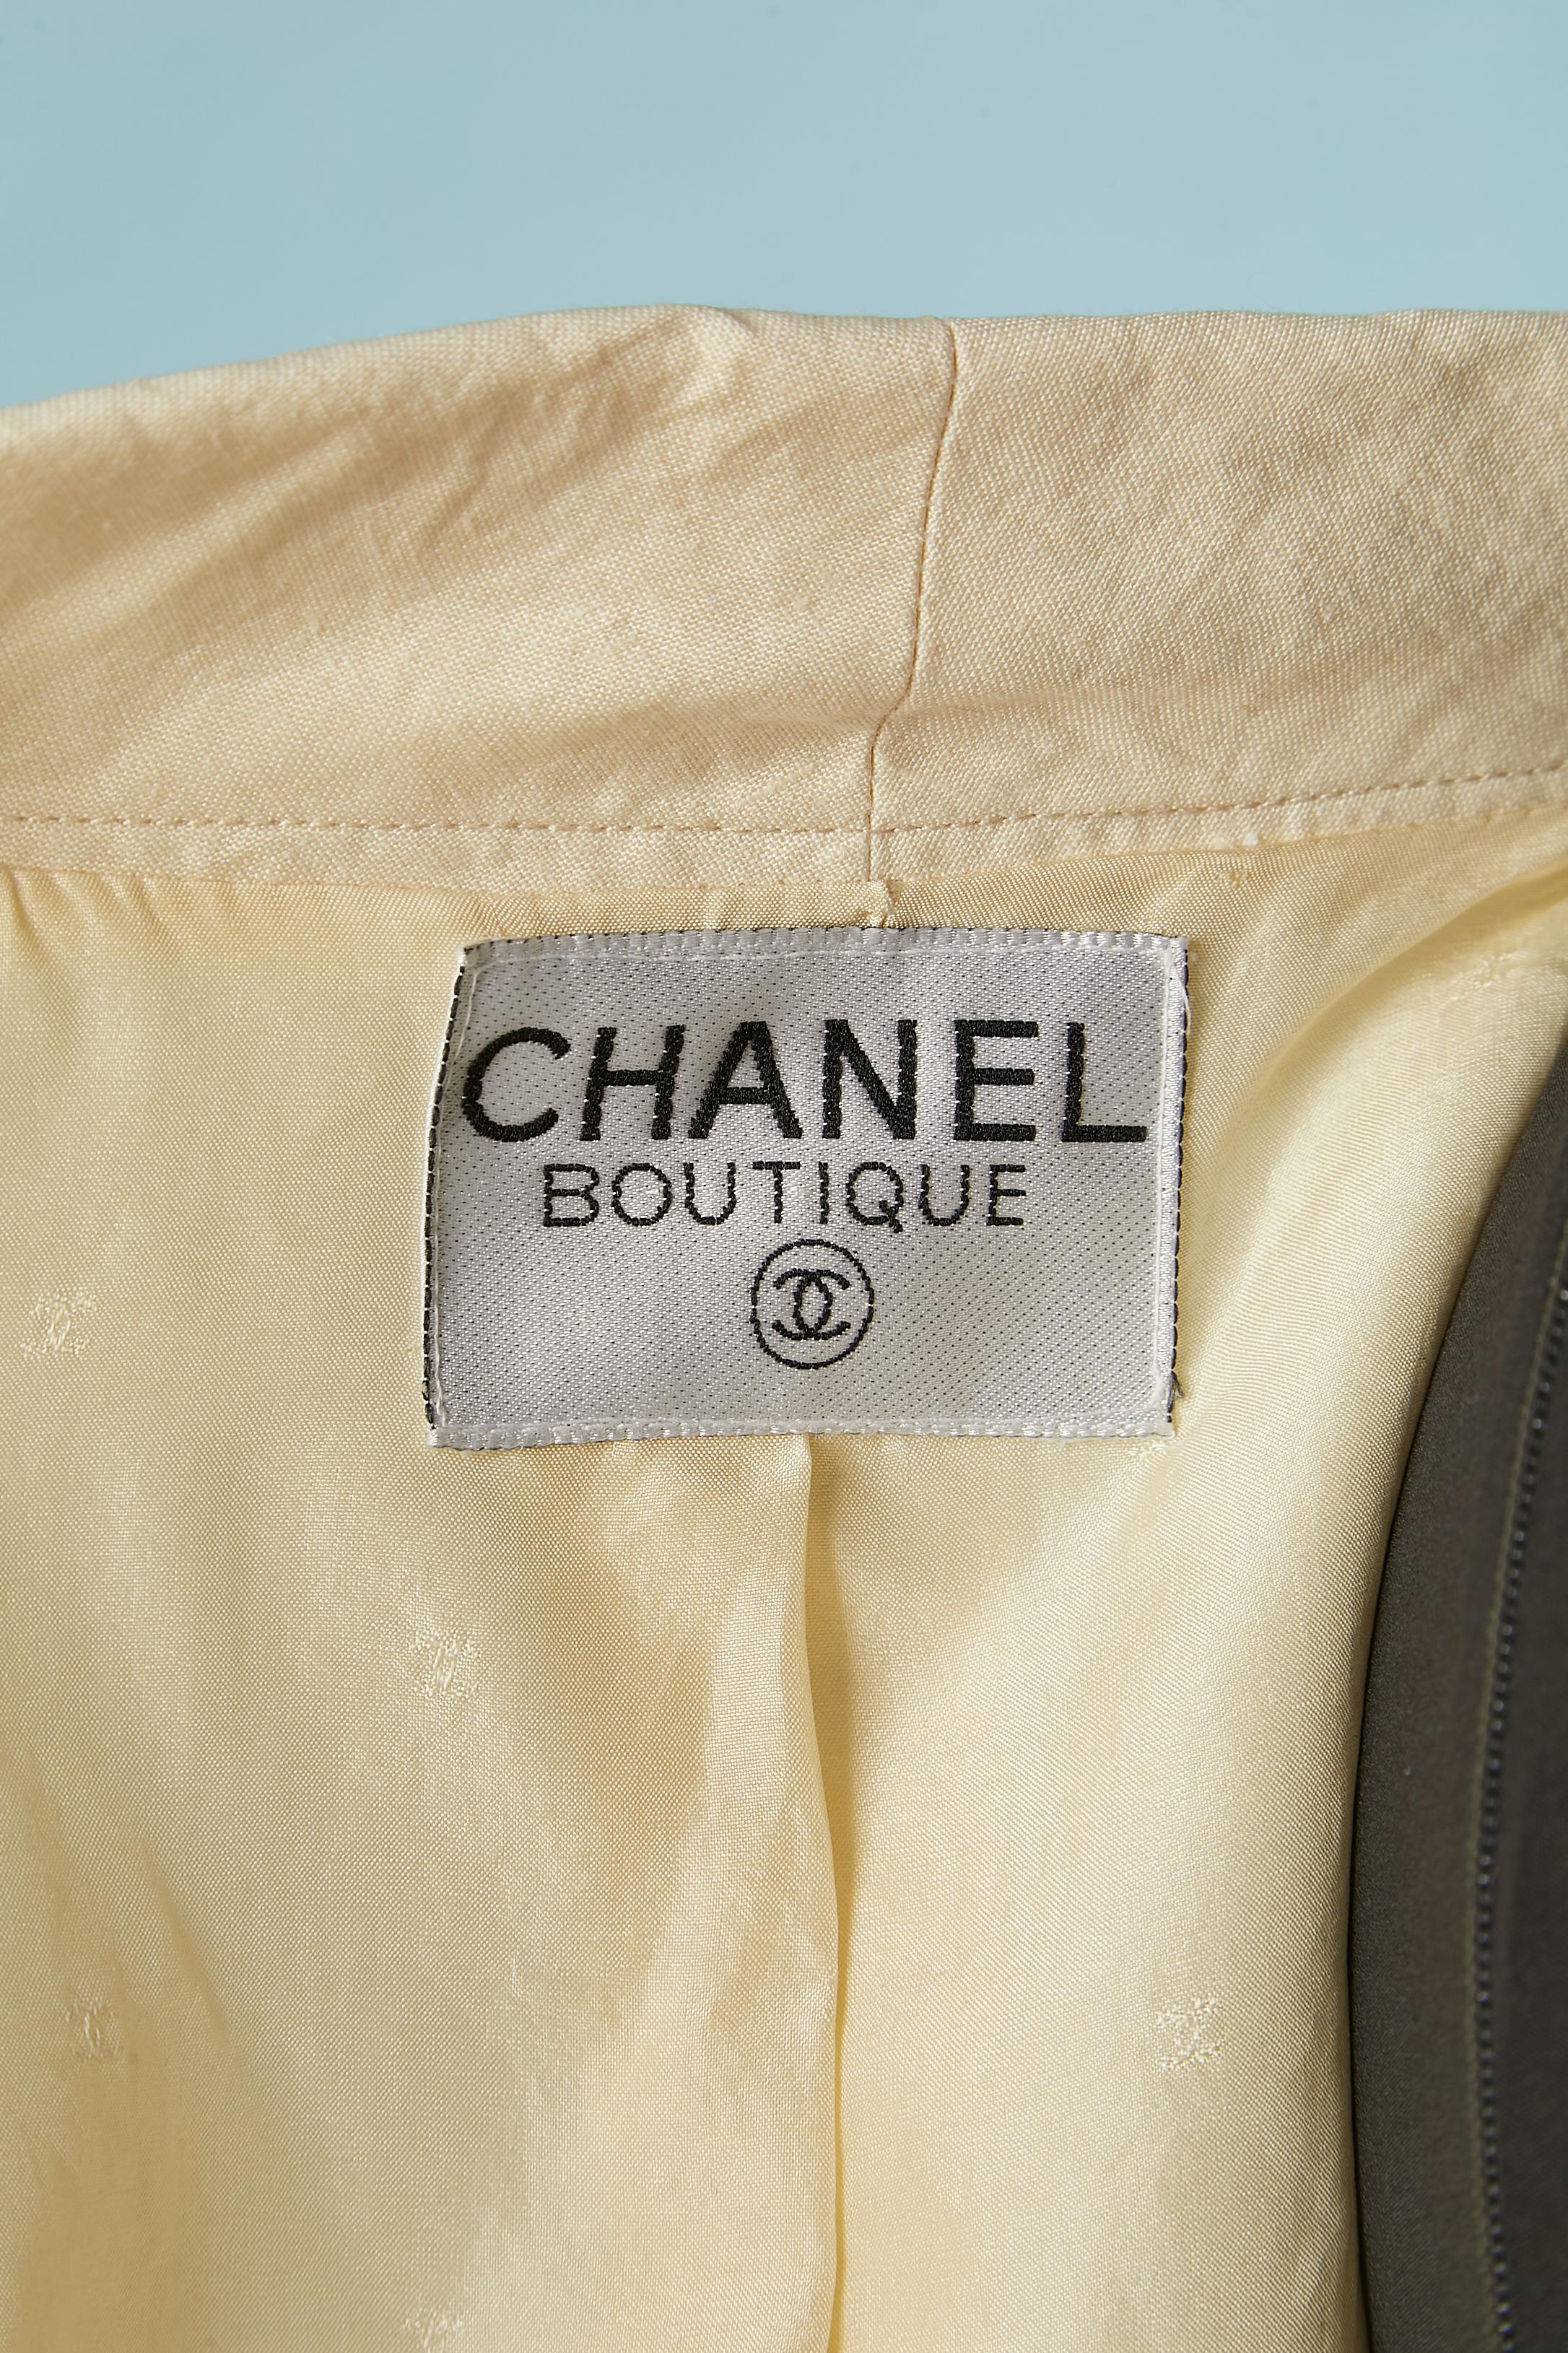 Off-white linen and silk chiffon skirt-suit  Chanel Boutique  For Sale 3